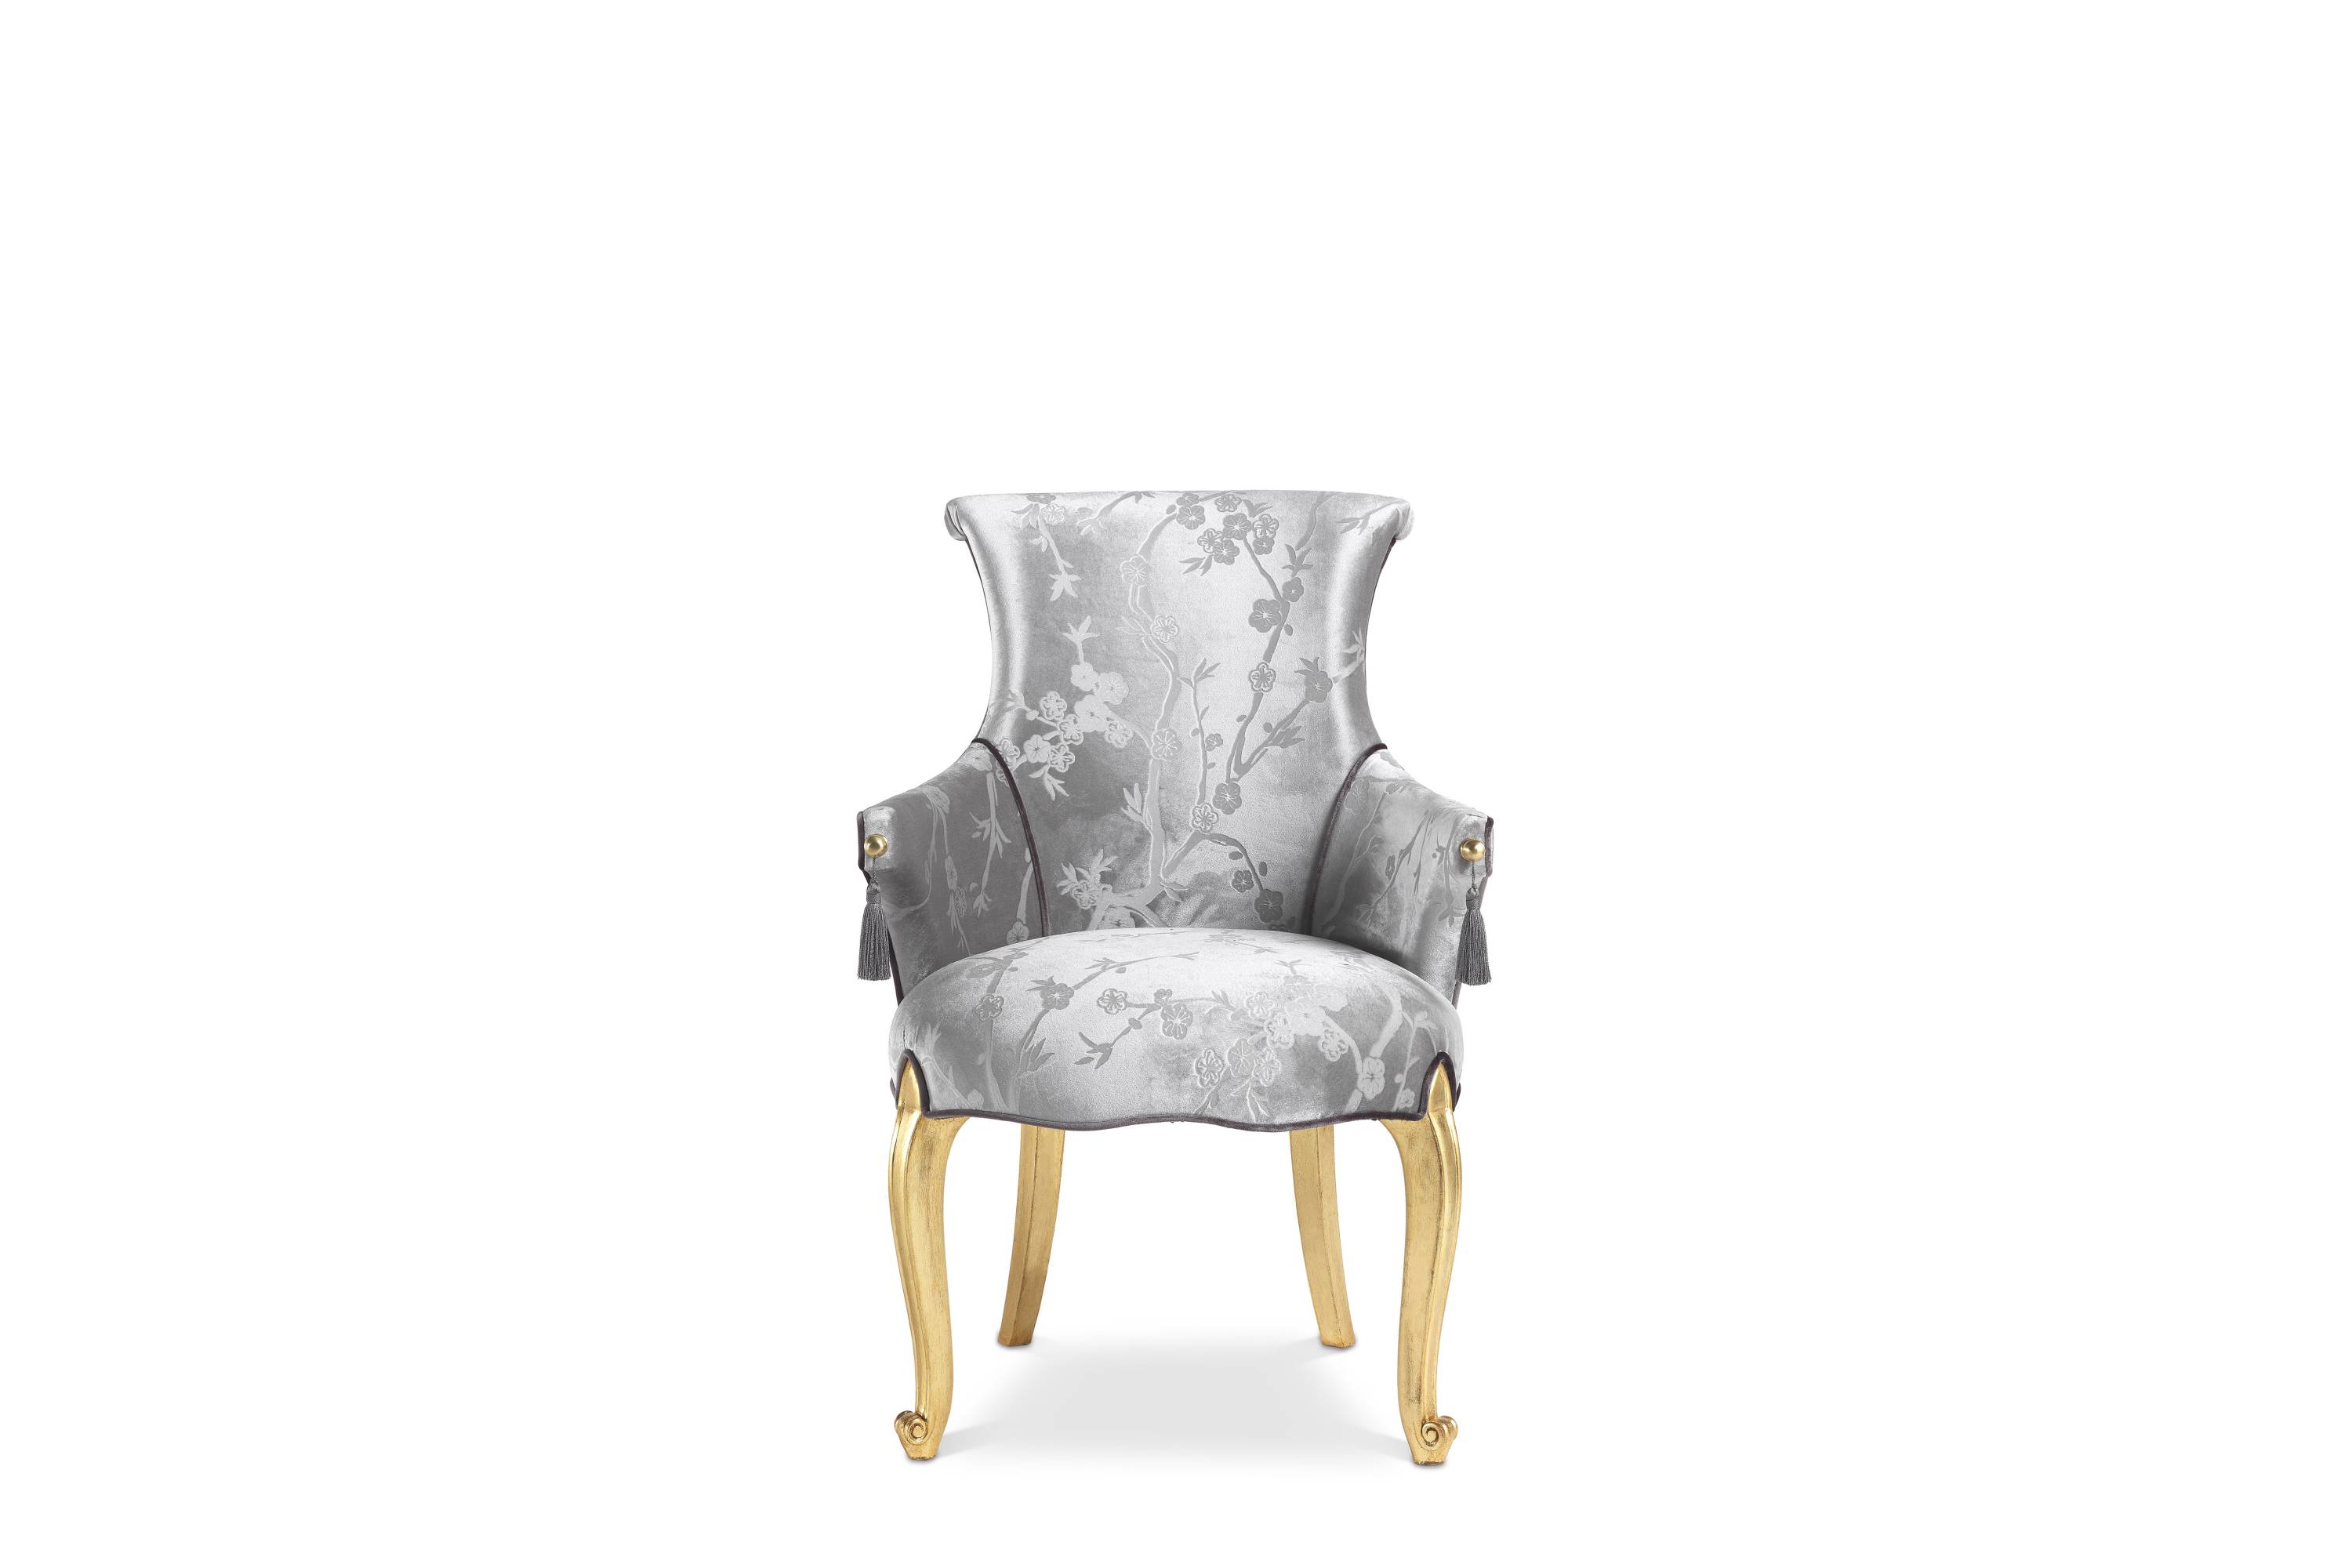 RIVOLI chair with armrests - Elevate your spaces with Made in Italy luxury classic chairs.